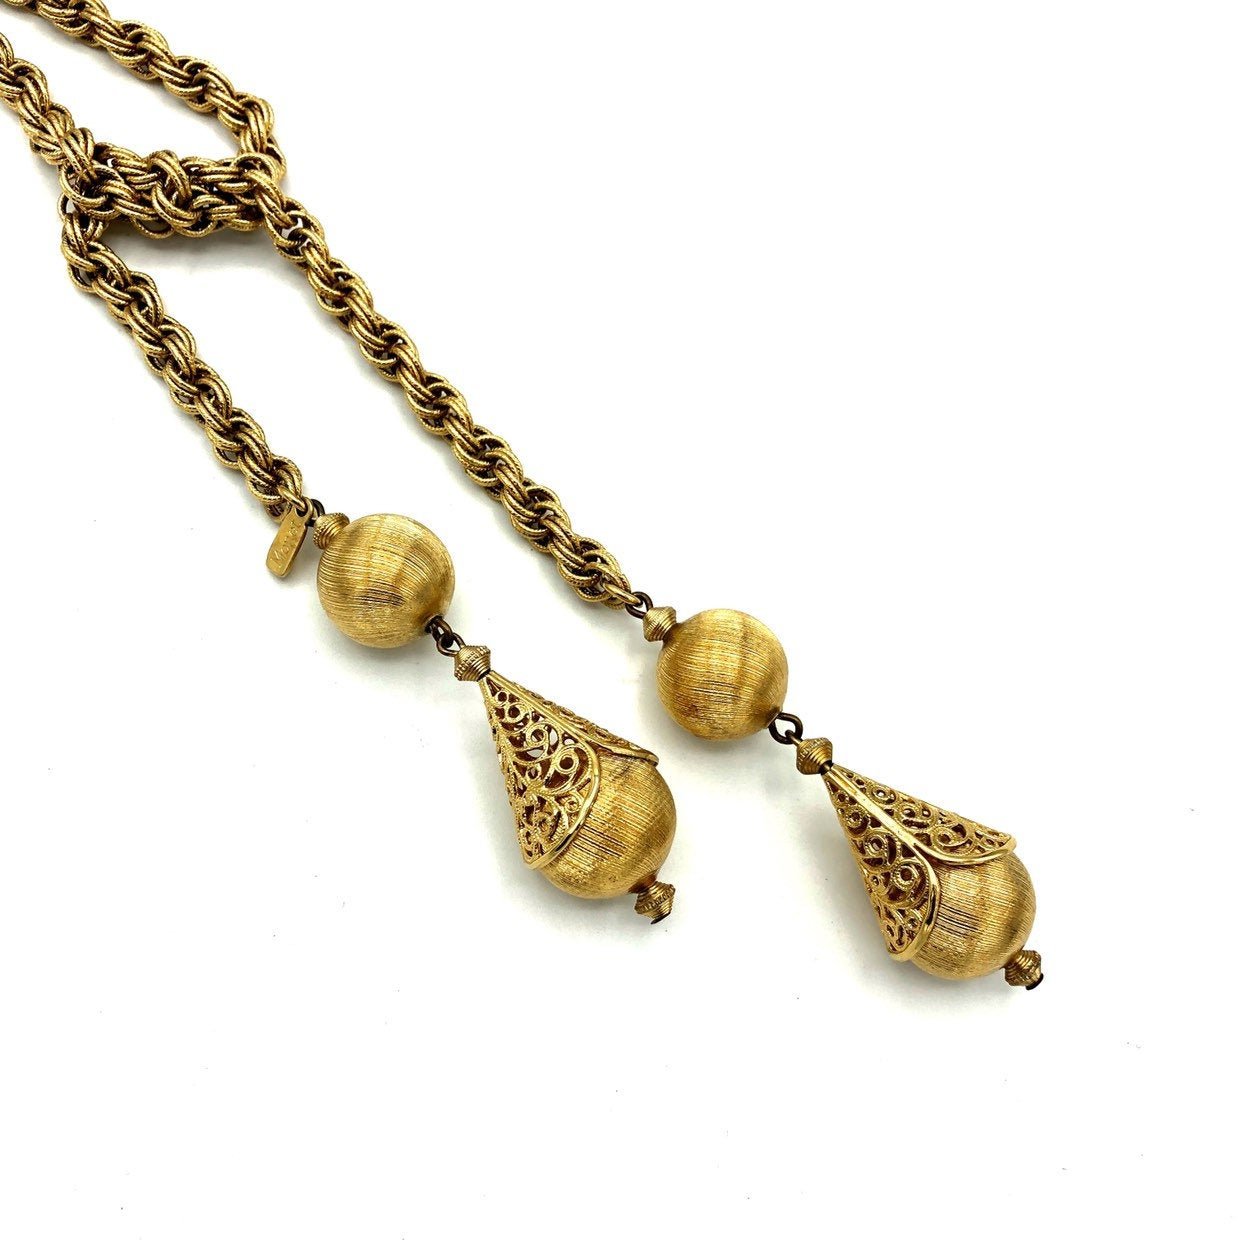 Buy Vintage Monet Necklace, Gold Tone Chain Necklace for Woman, Costume  Jewelry Online in India - Etsy